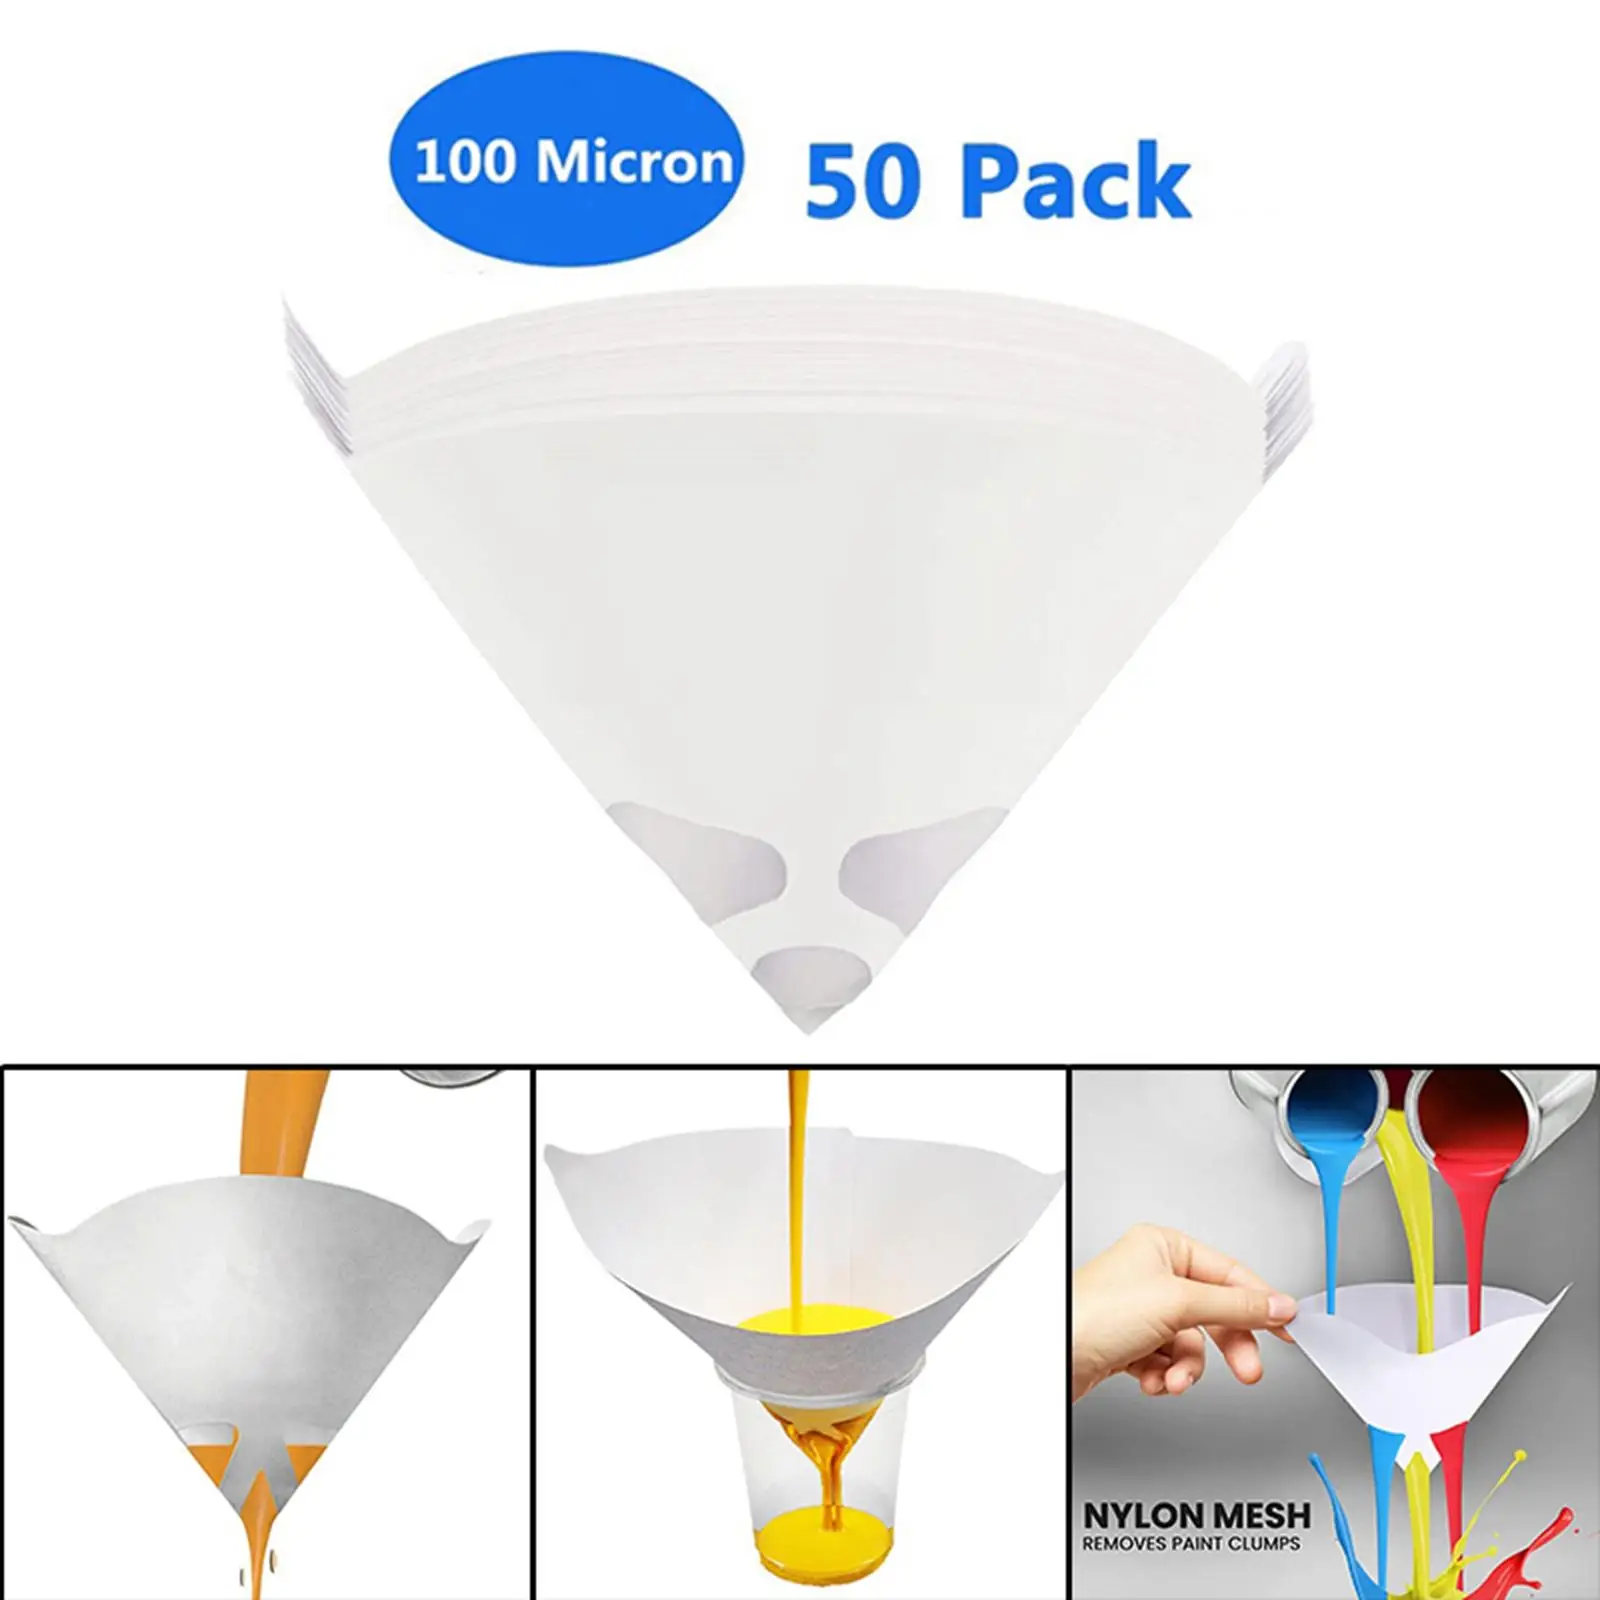 50 Set Cone Funnel Fine Mesh Cone Shaped Disposable Paint Filter for Painting Projects 3D Printing Resin